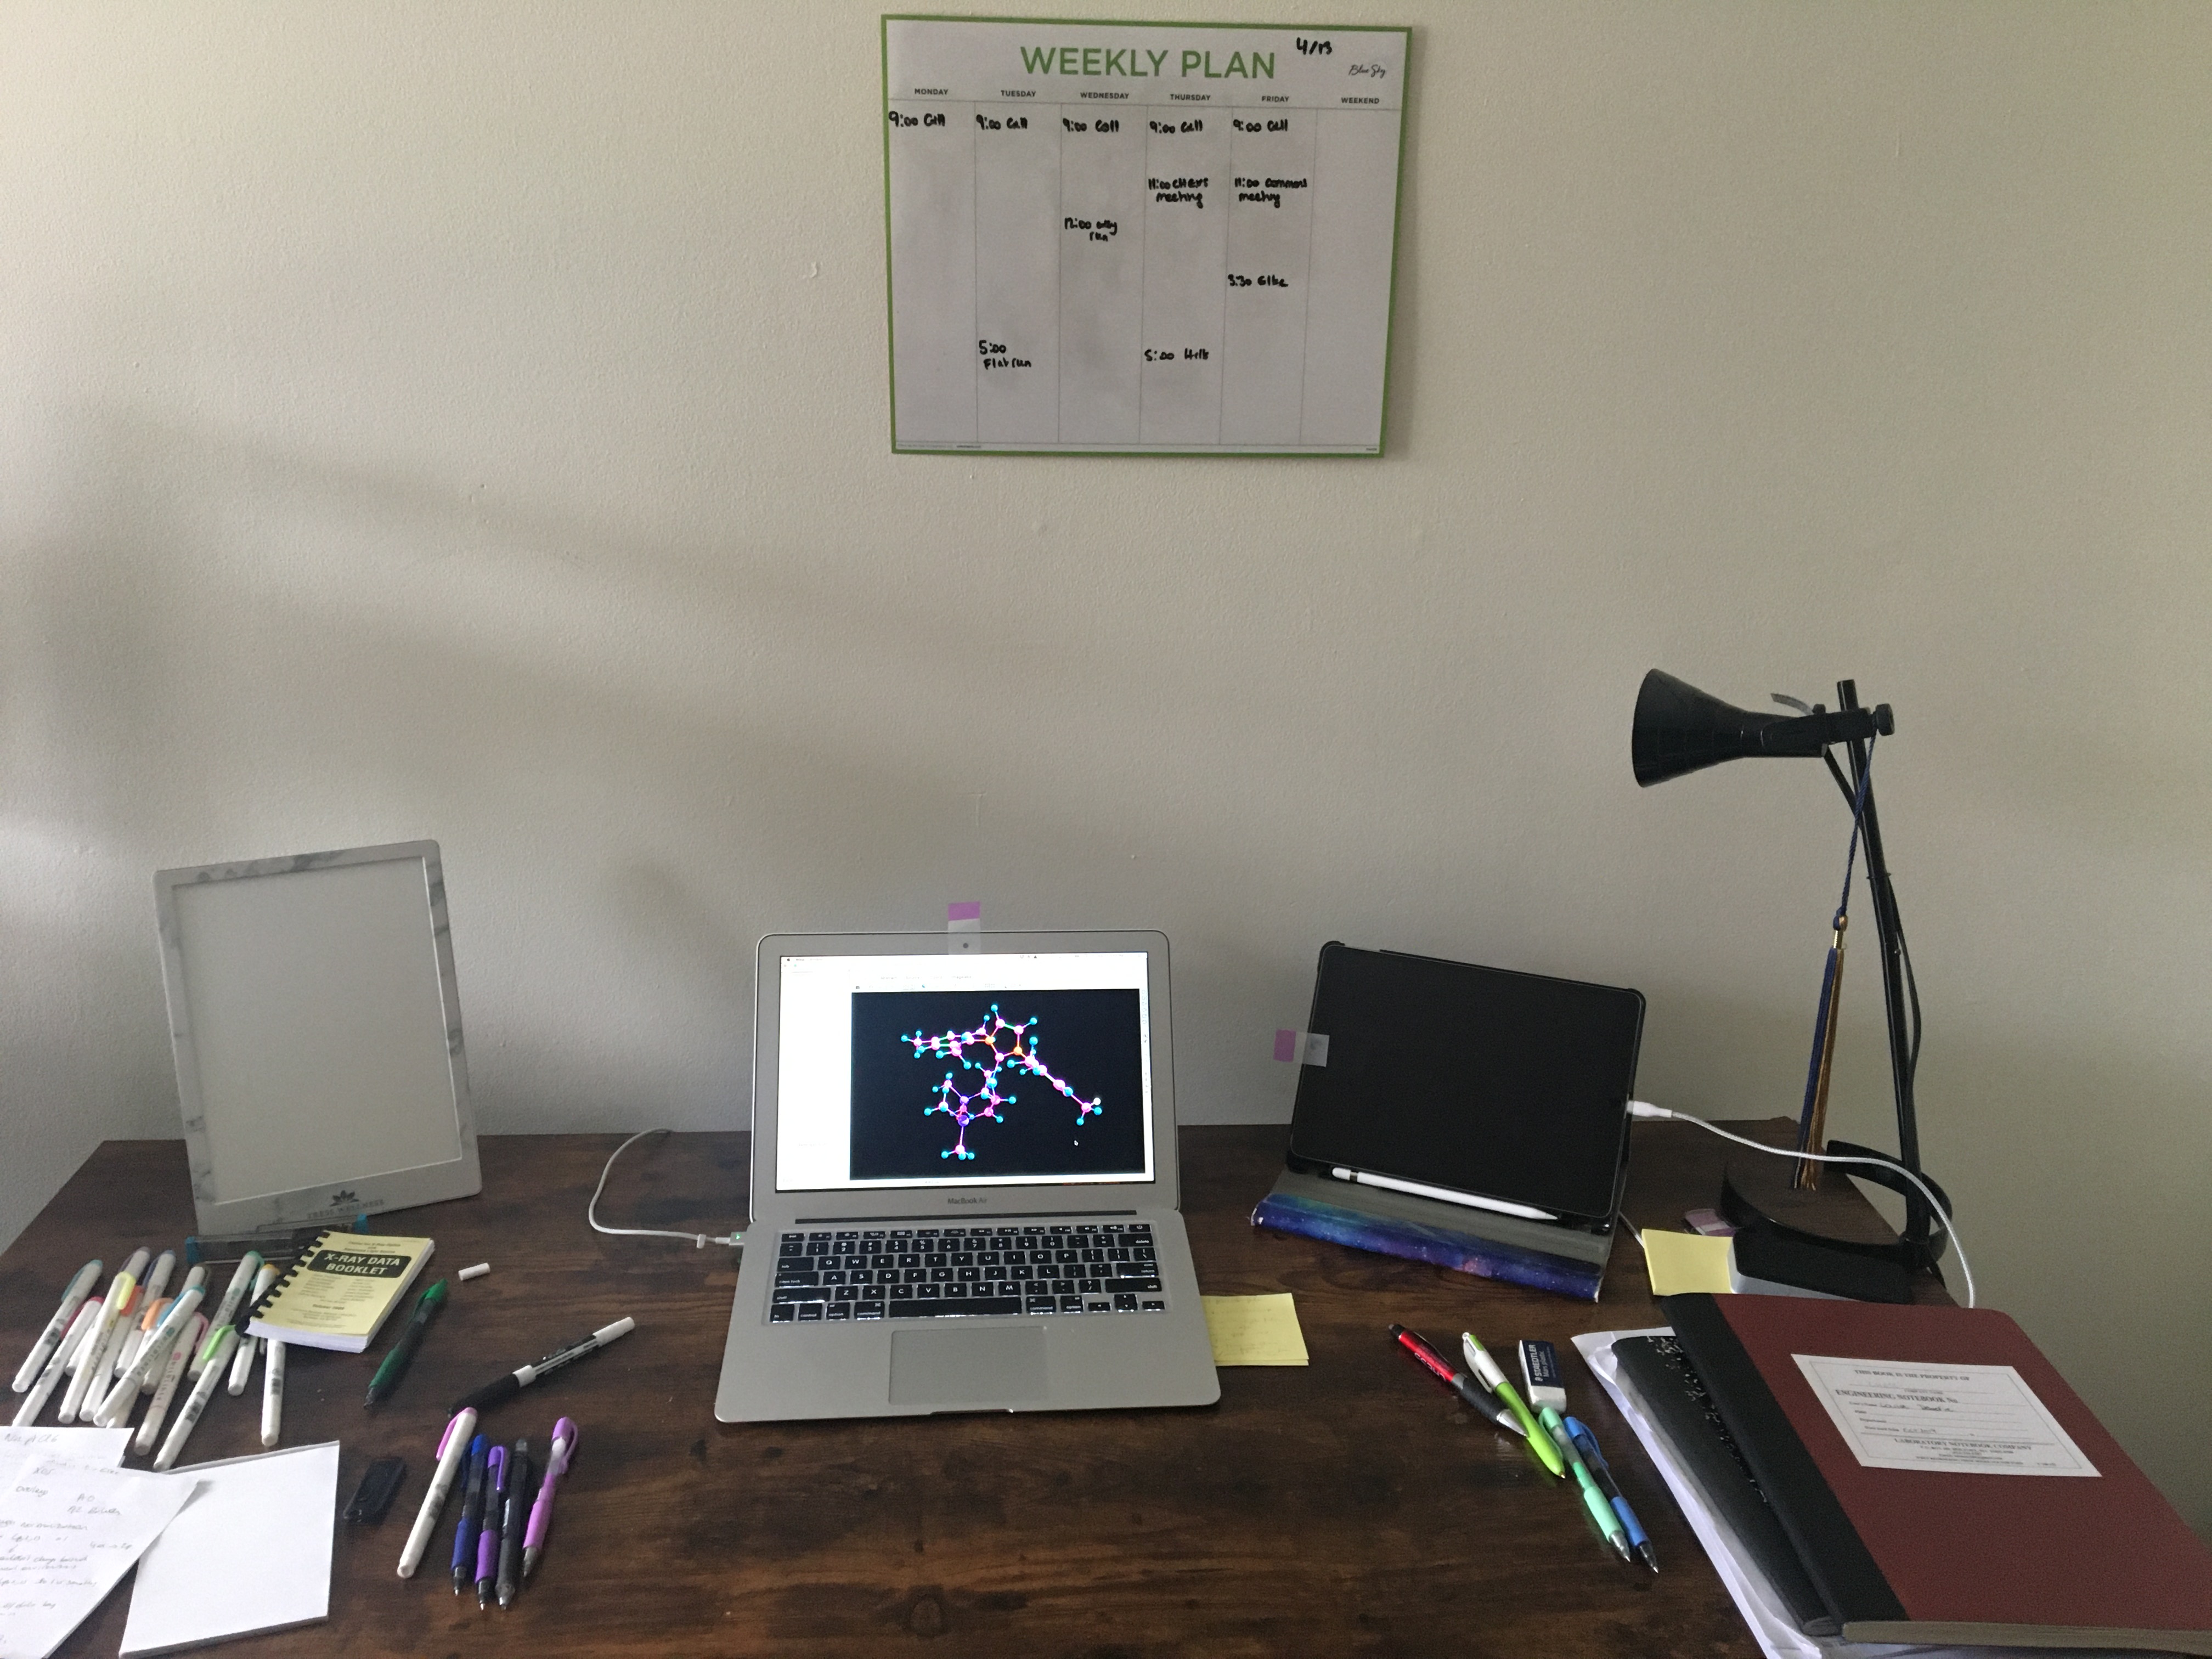 Louise's workstation at home